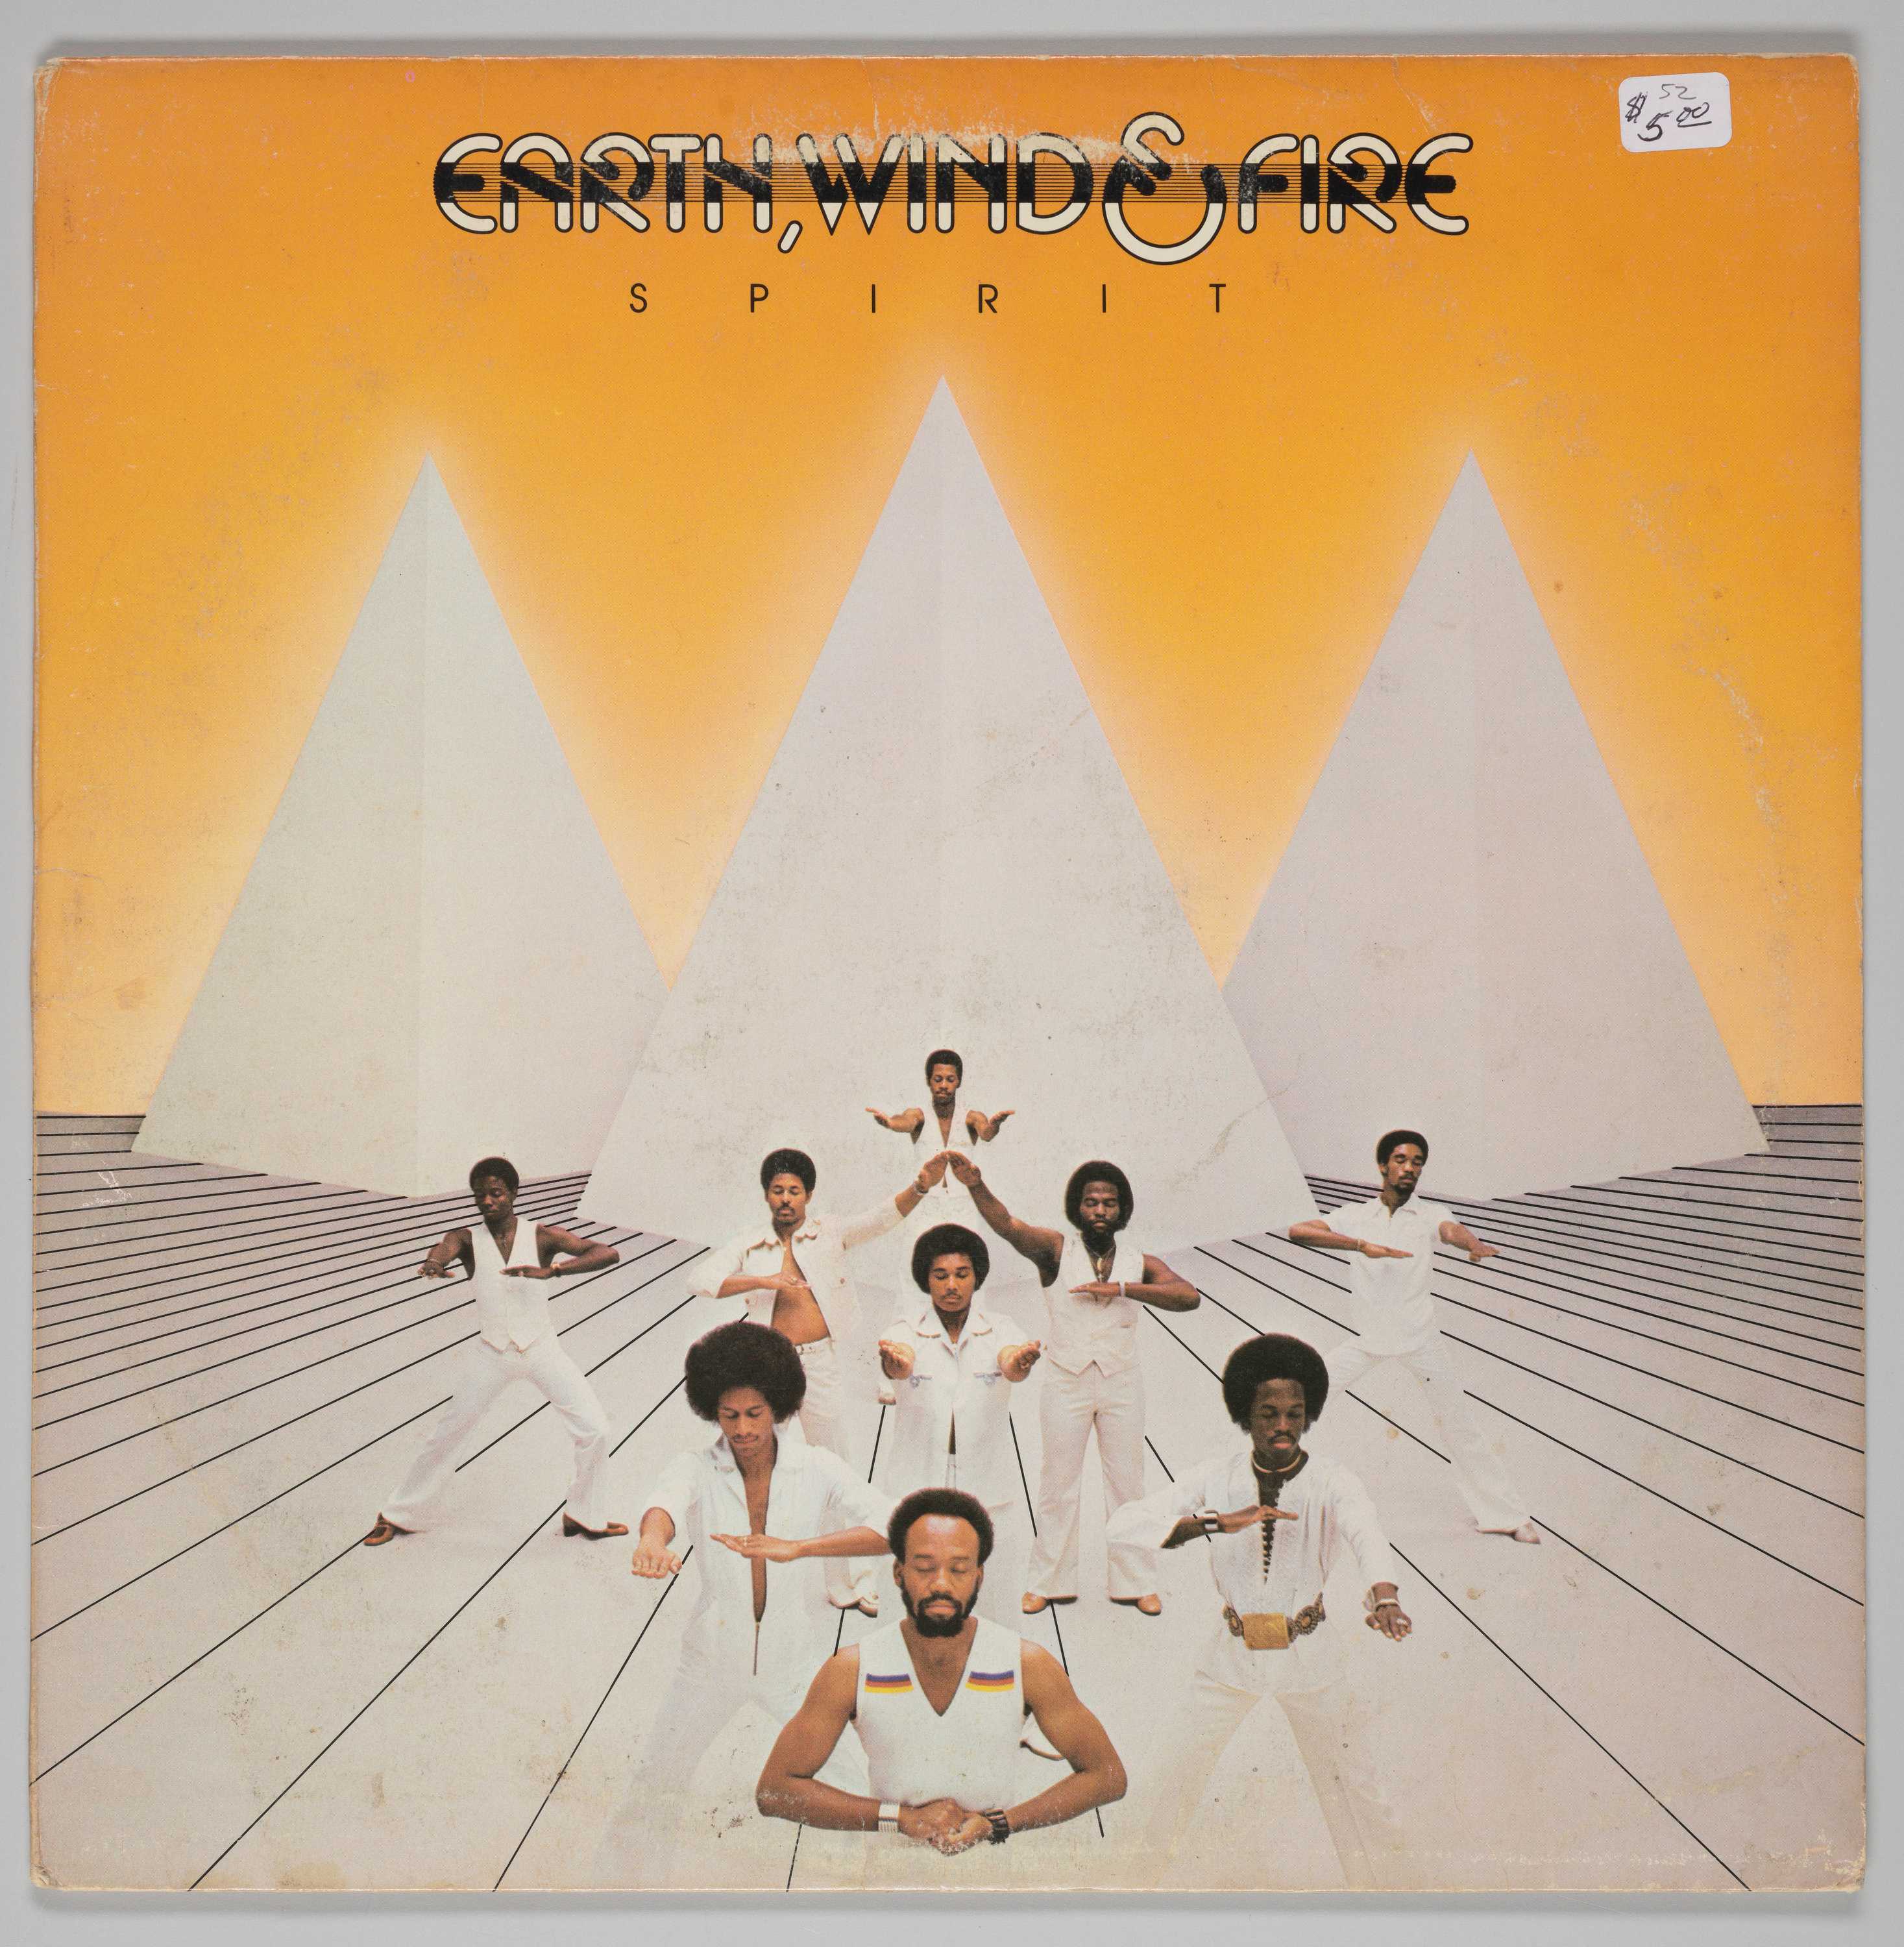 The cover for Earth, Wind & Fire's Spirit has the band's name in fiery letters surrounded by cosmic patterns.